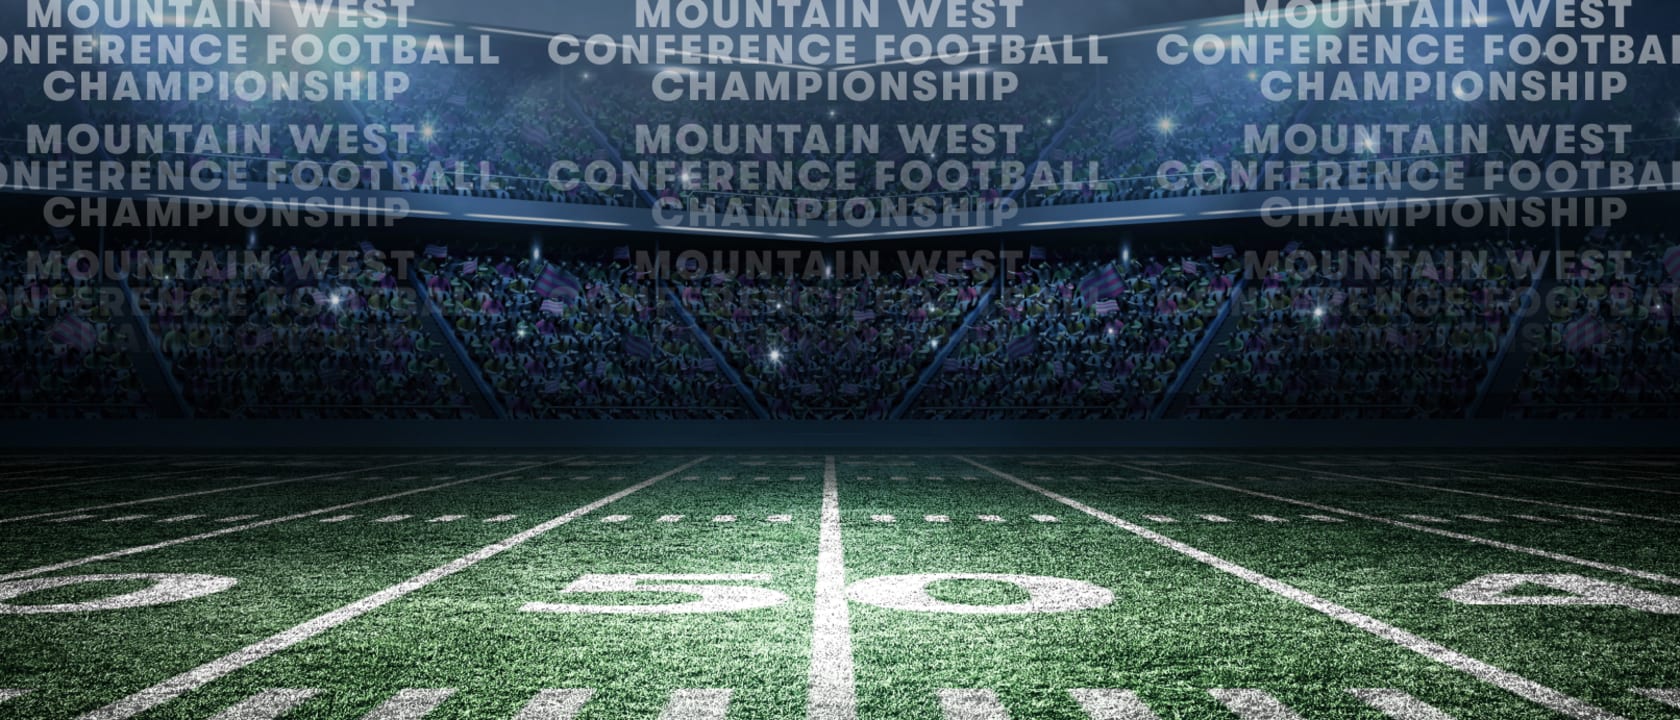 Mountain West Conference Football Championship